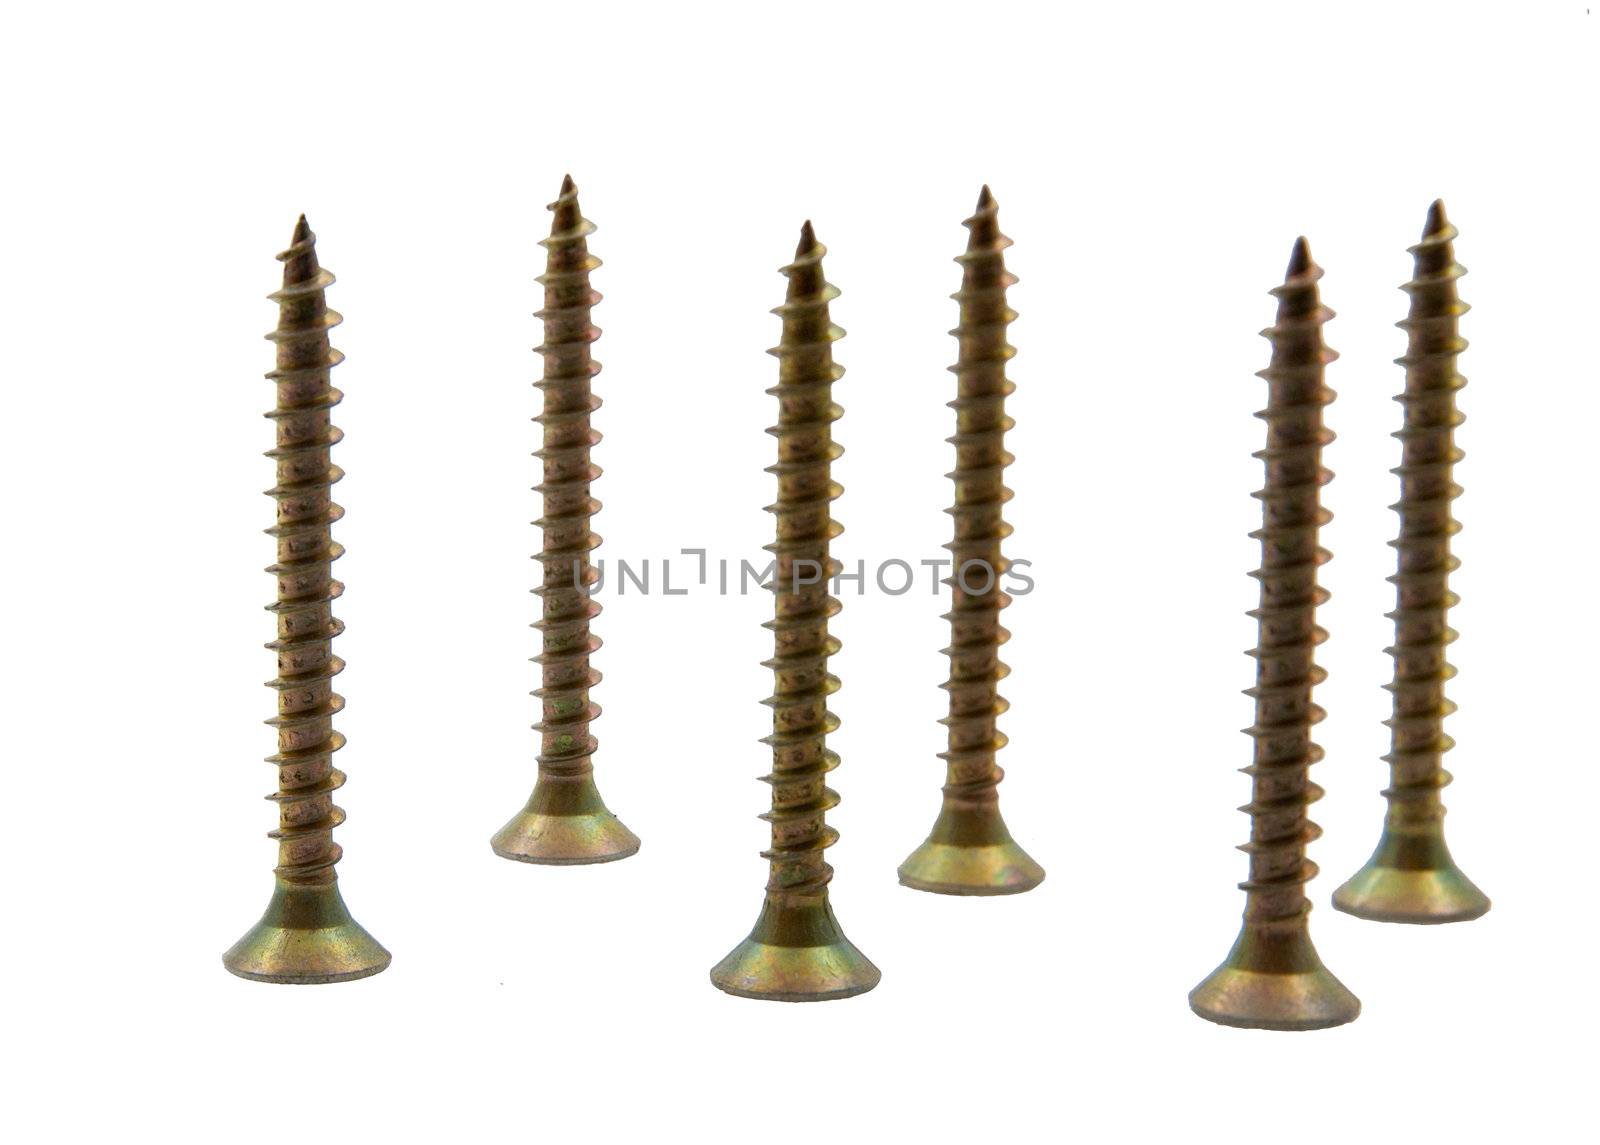 The picture of the cute copper screws